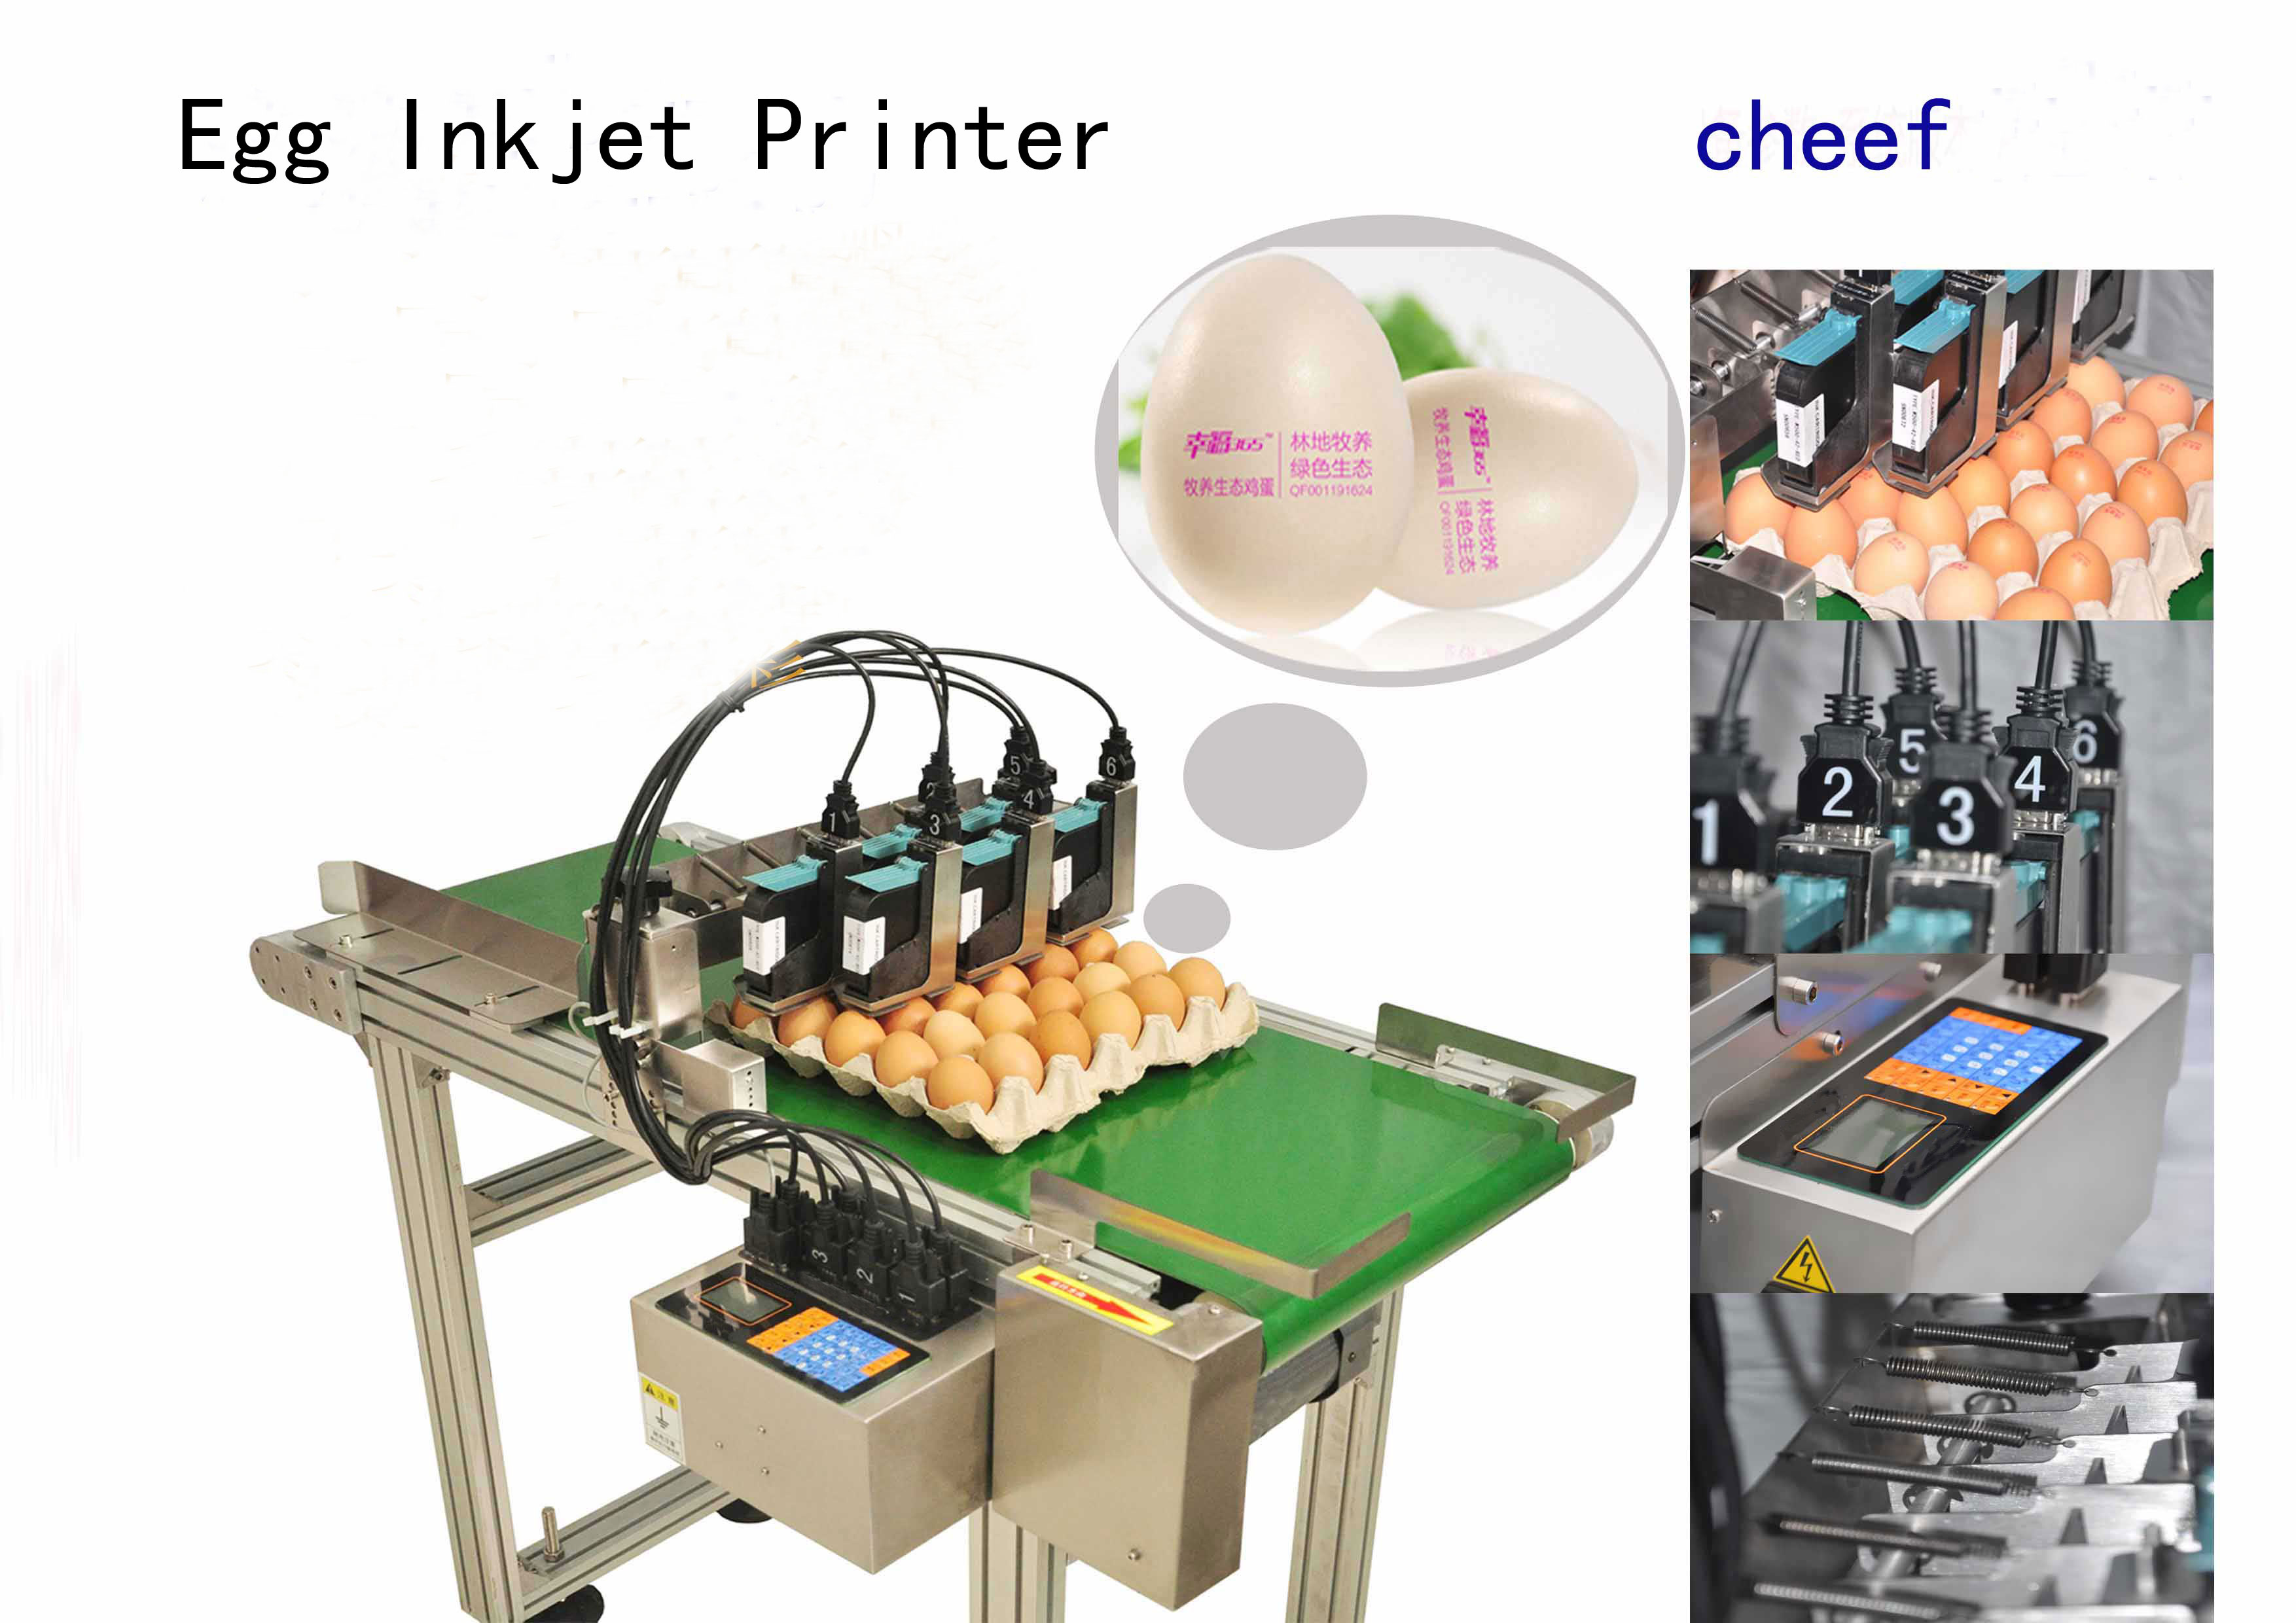 advanced cheap high stability tij printing machine with edible ink cartridge batch printing on eggs